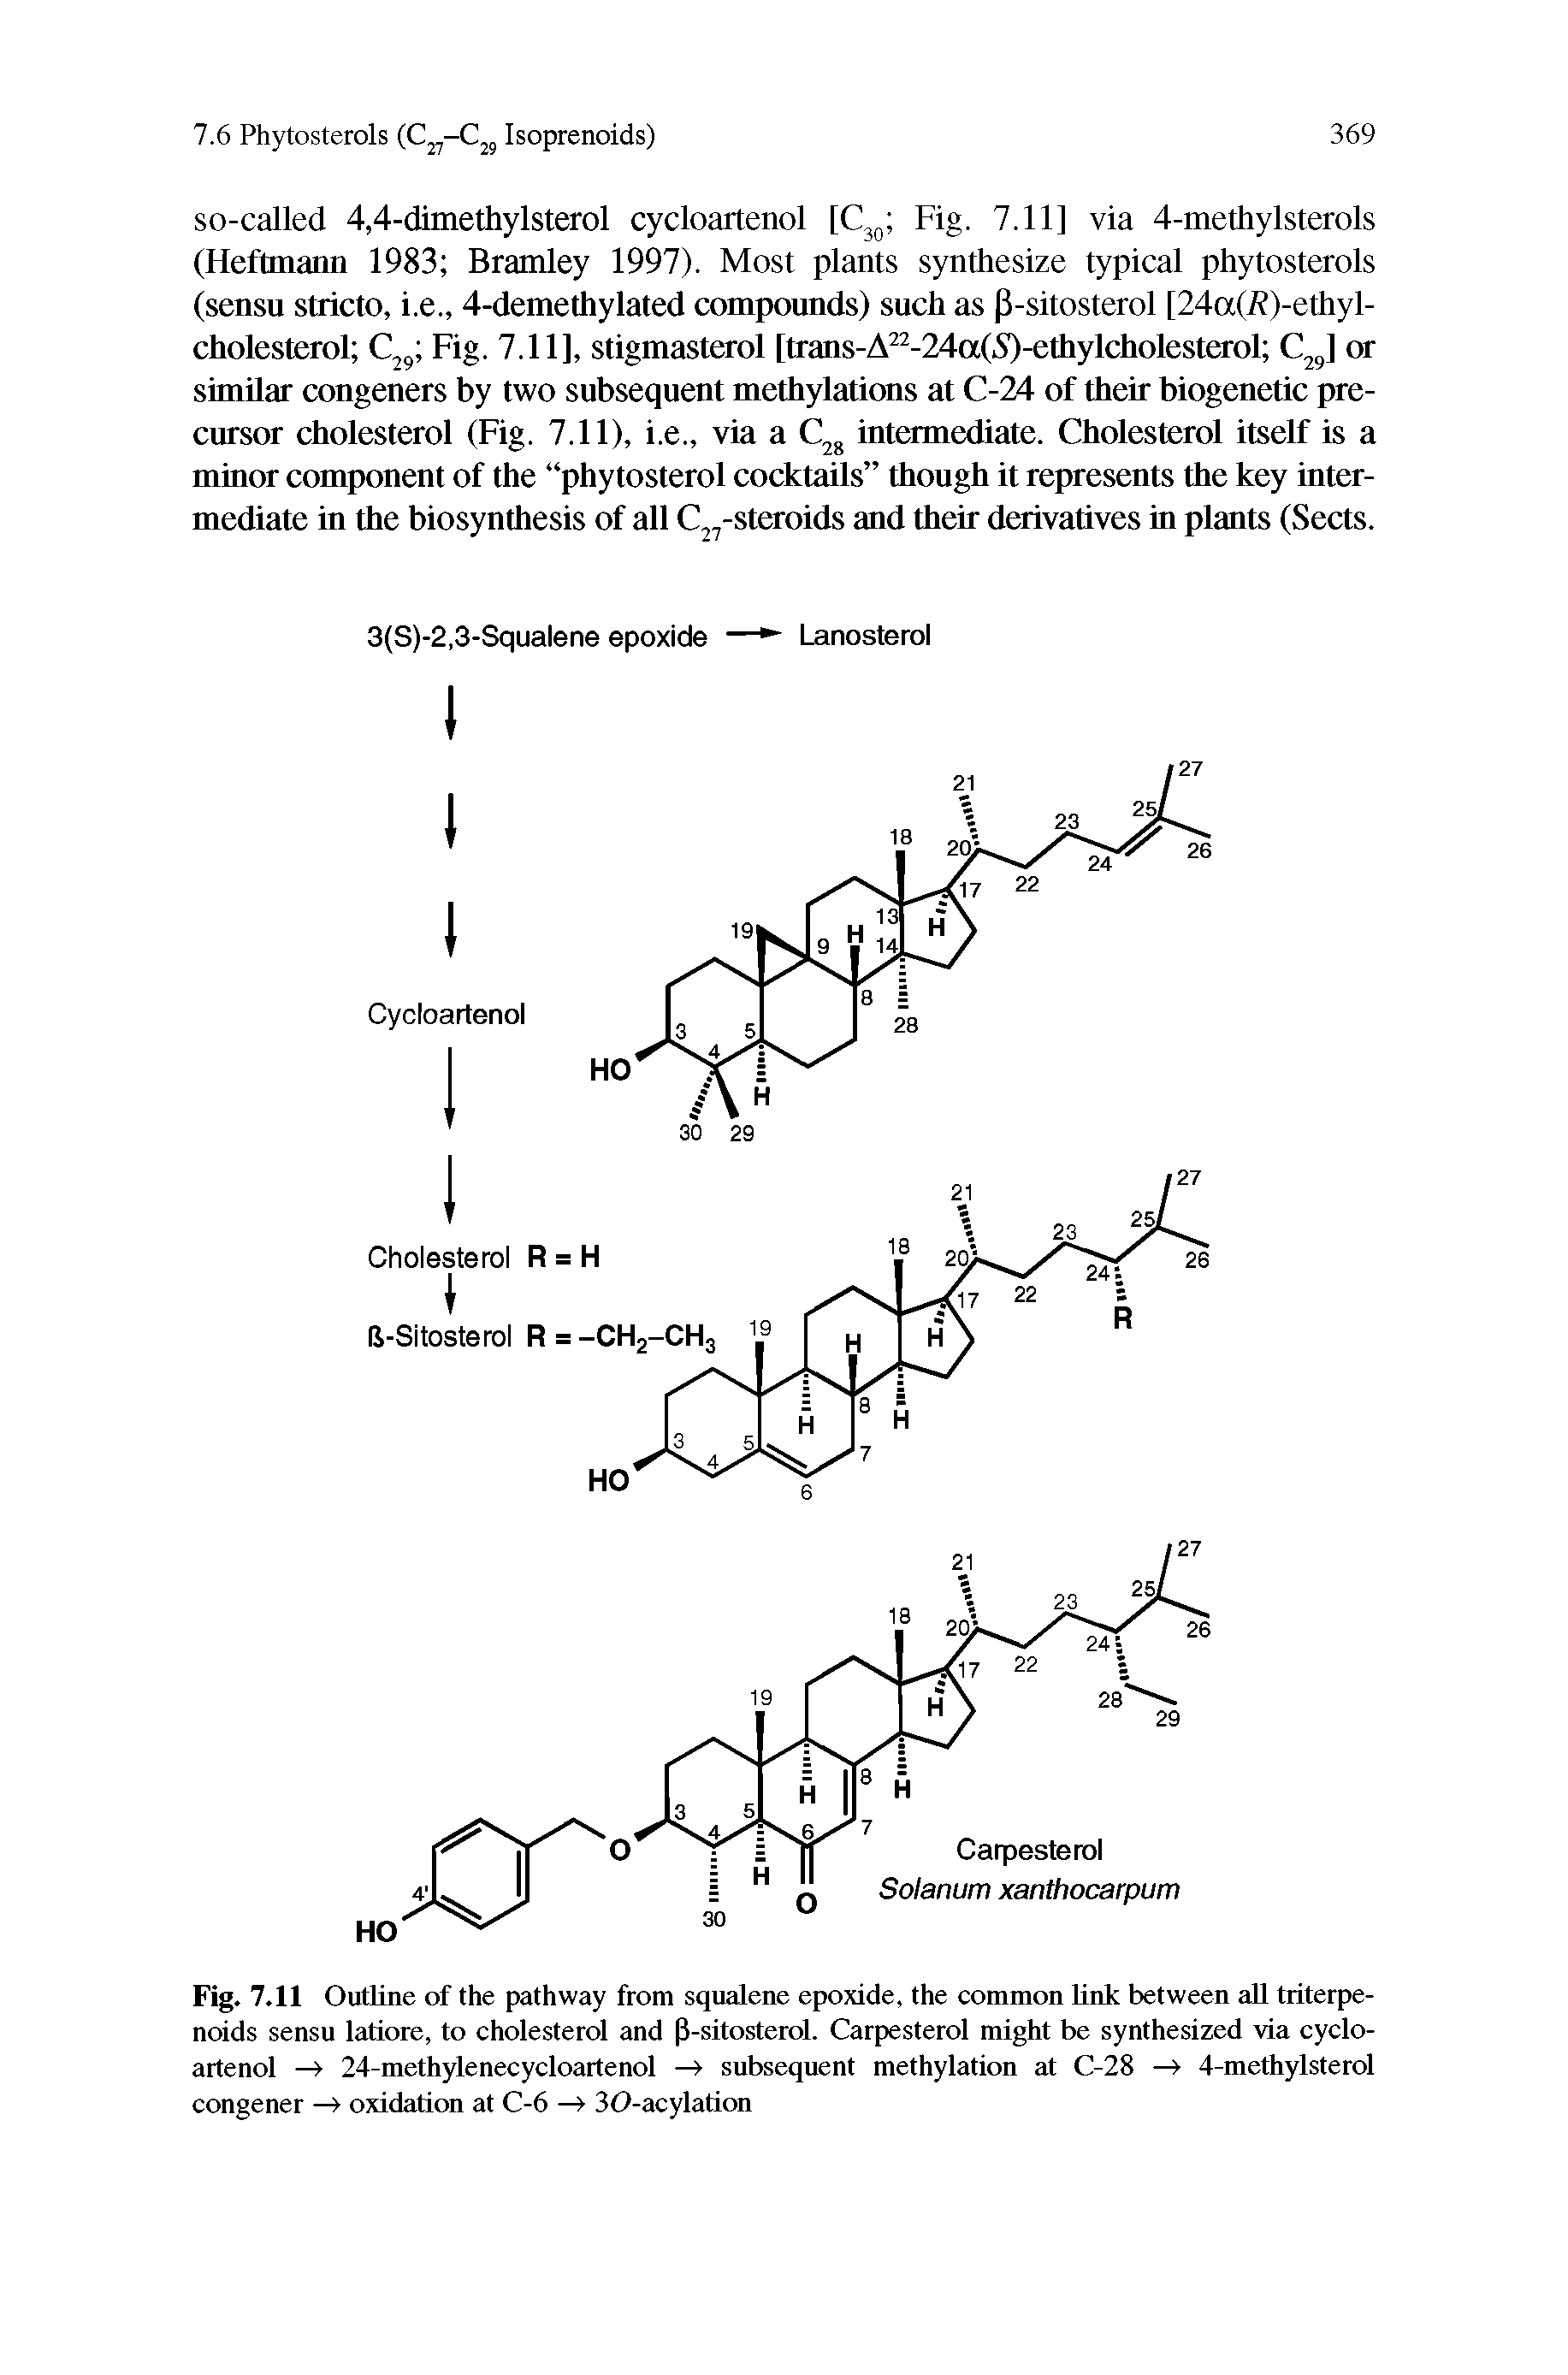 Fig. 7.11 Outline of the pathway from squalene epoxide, the common Unk between all triterpenoids sensu latiore, to cholesterol and P-sitosterol. Carpesterol might be synthesized via cycloartenol —> 24-methylenecycloartenol —> subsequent methylation at C-28 —> 4-methylsterol congener —> oxidation at C-6 —> 30-acylation...